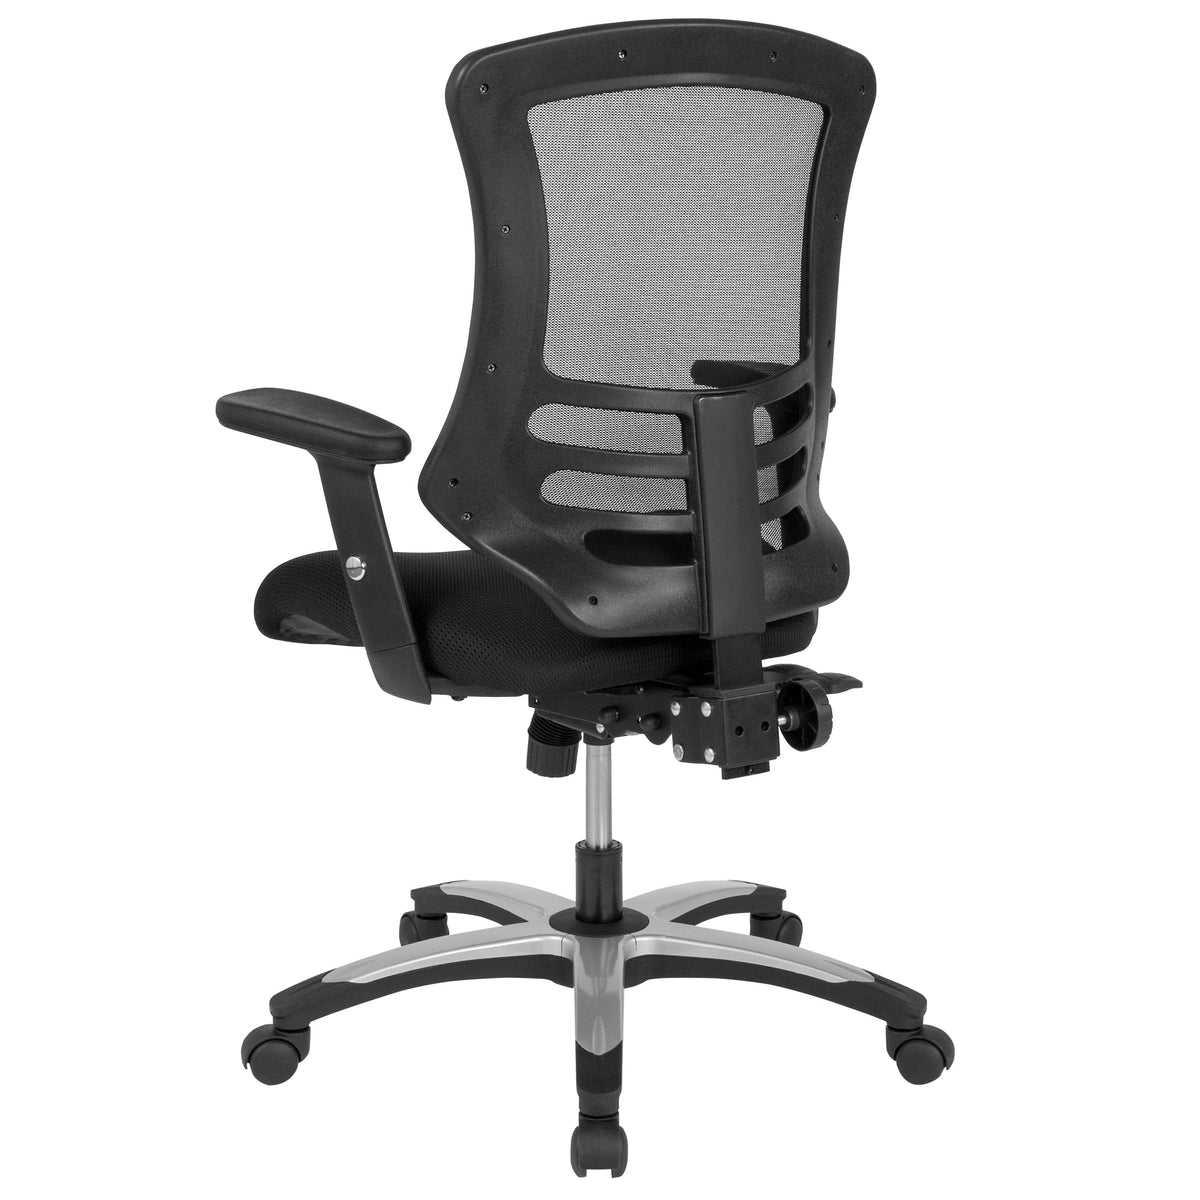 High Back Black Mesh Multifunction Ergonomic Swivel Chair with Adjustable Arms